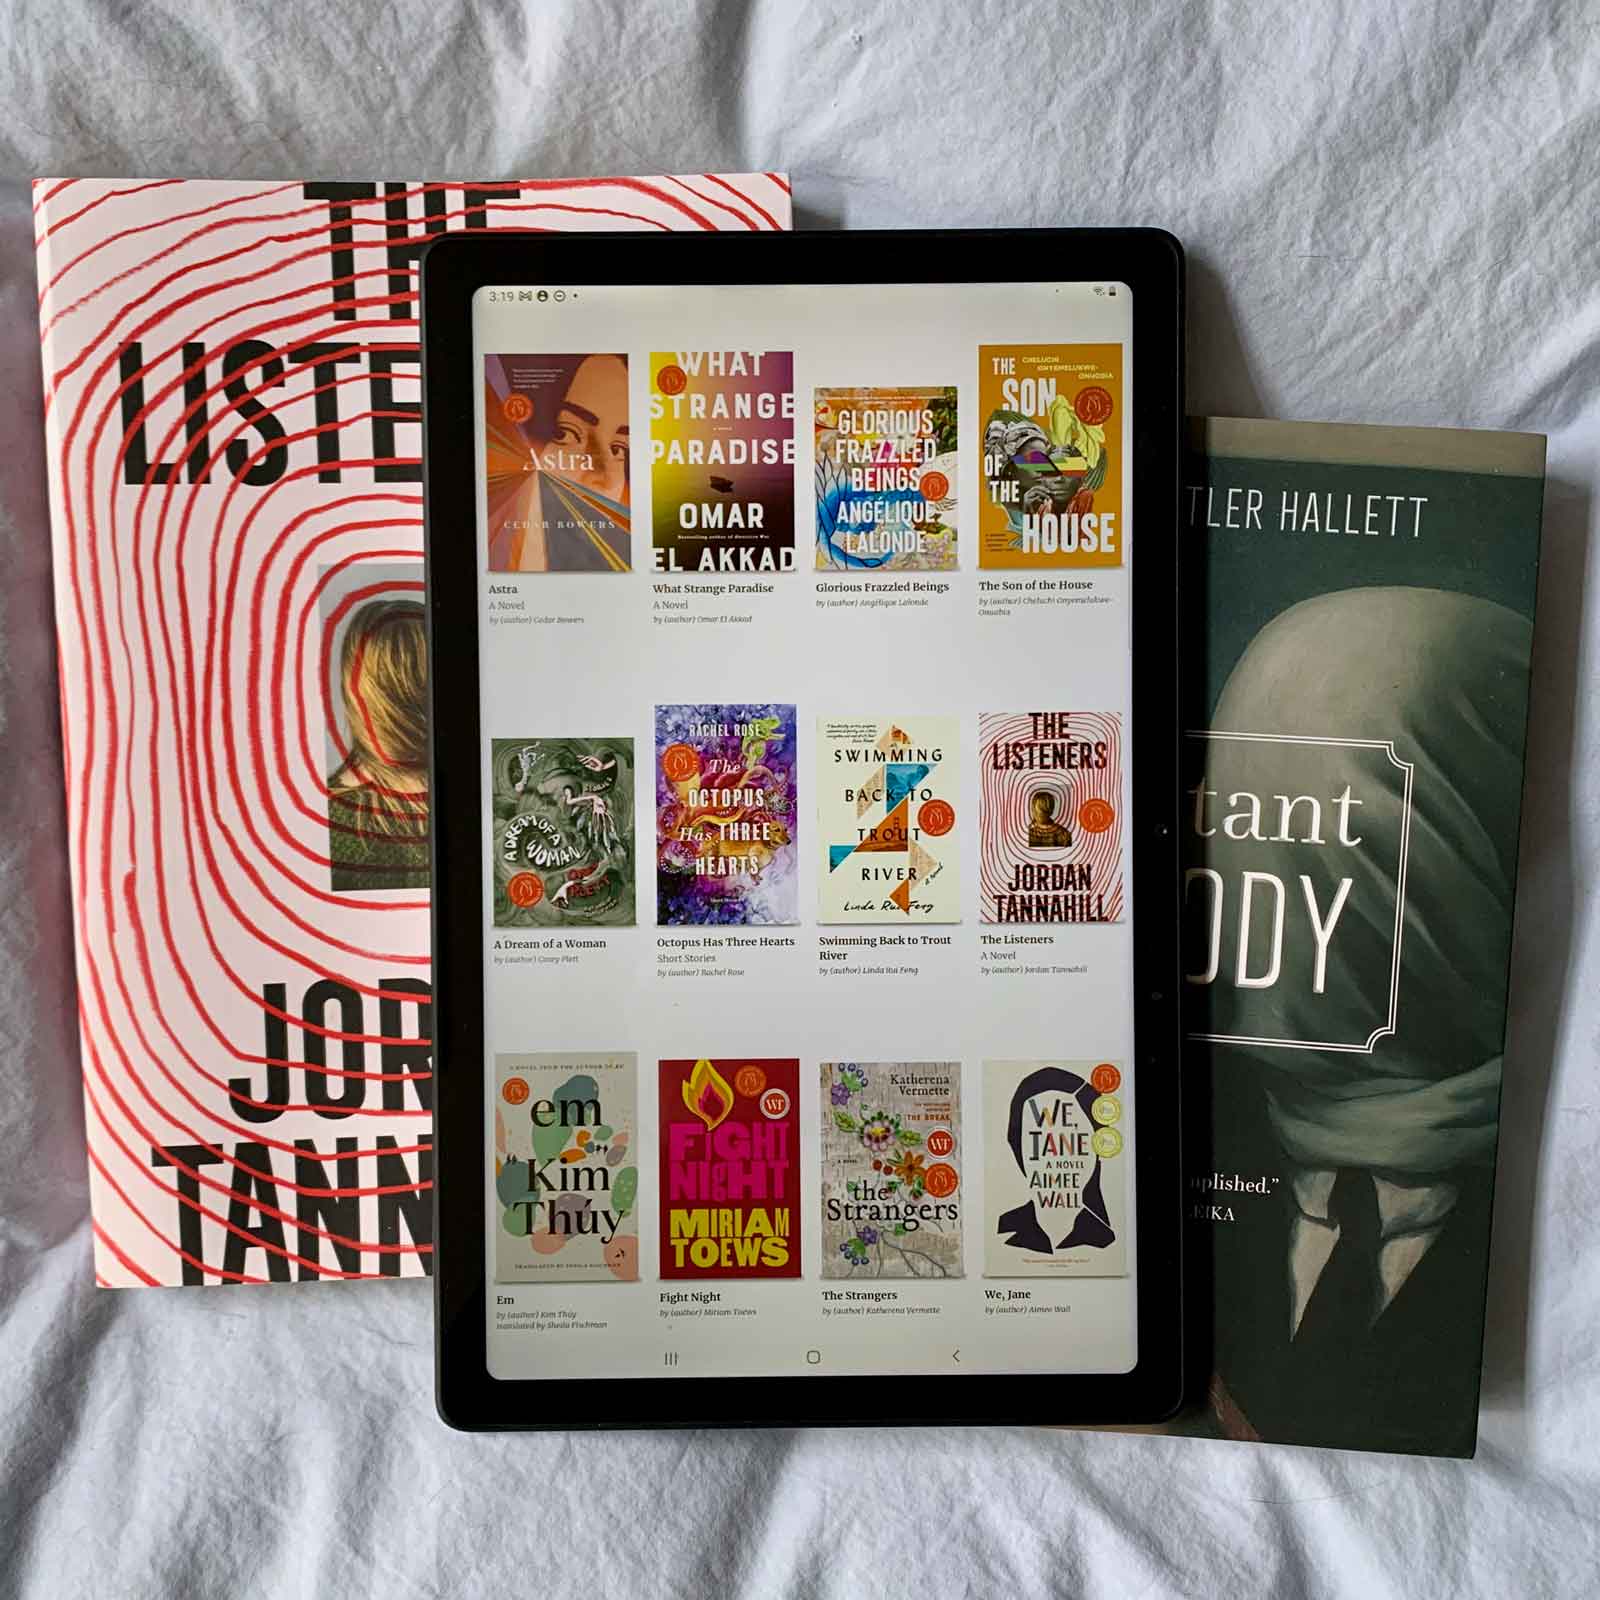 49th Shelf list view on a tablet with books